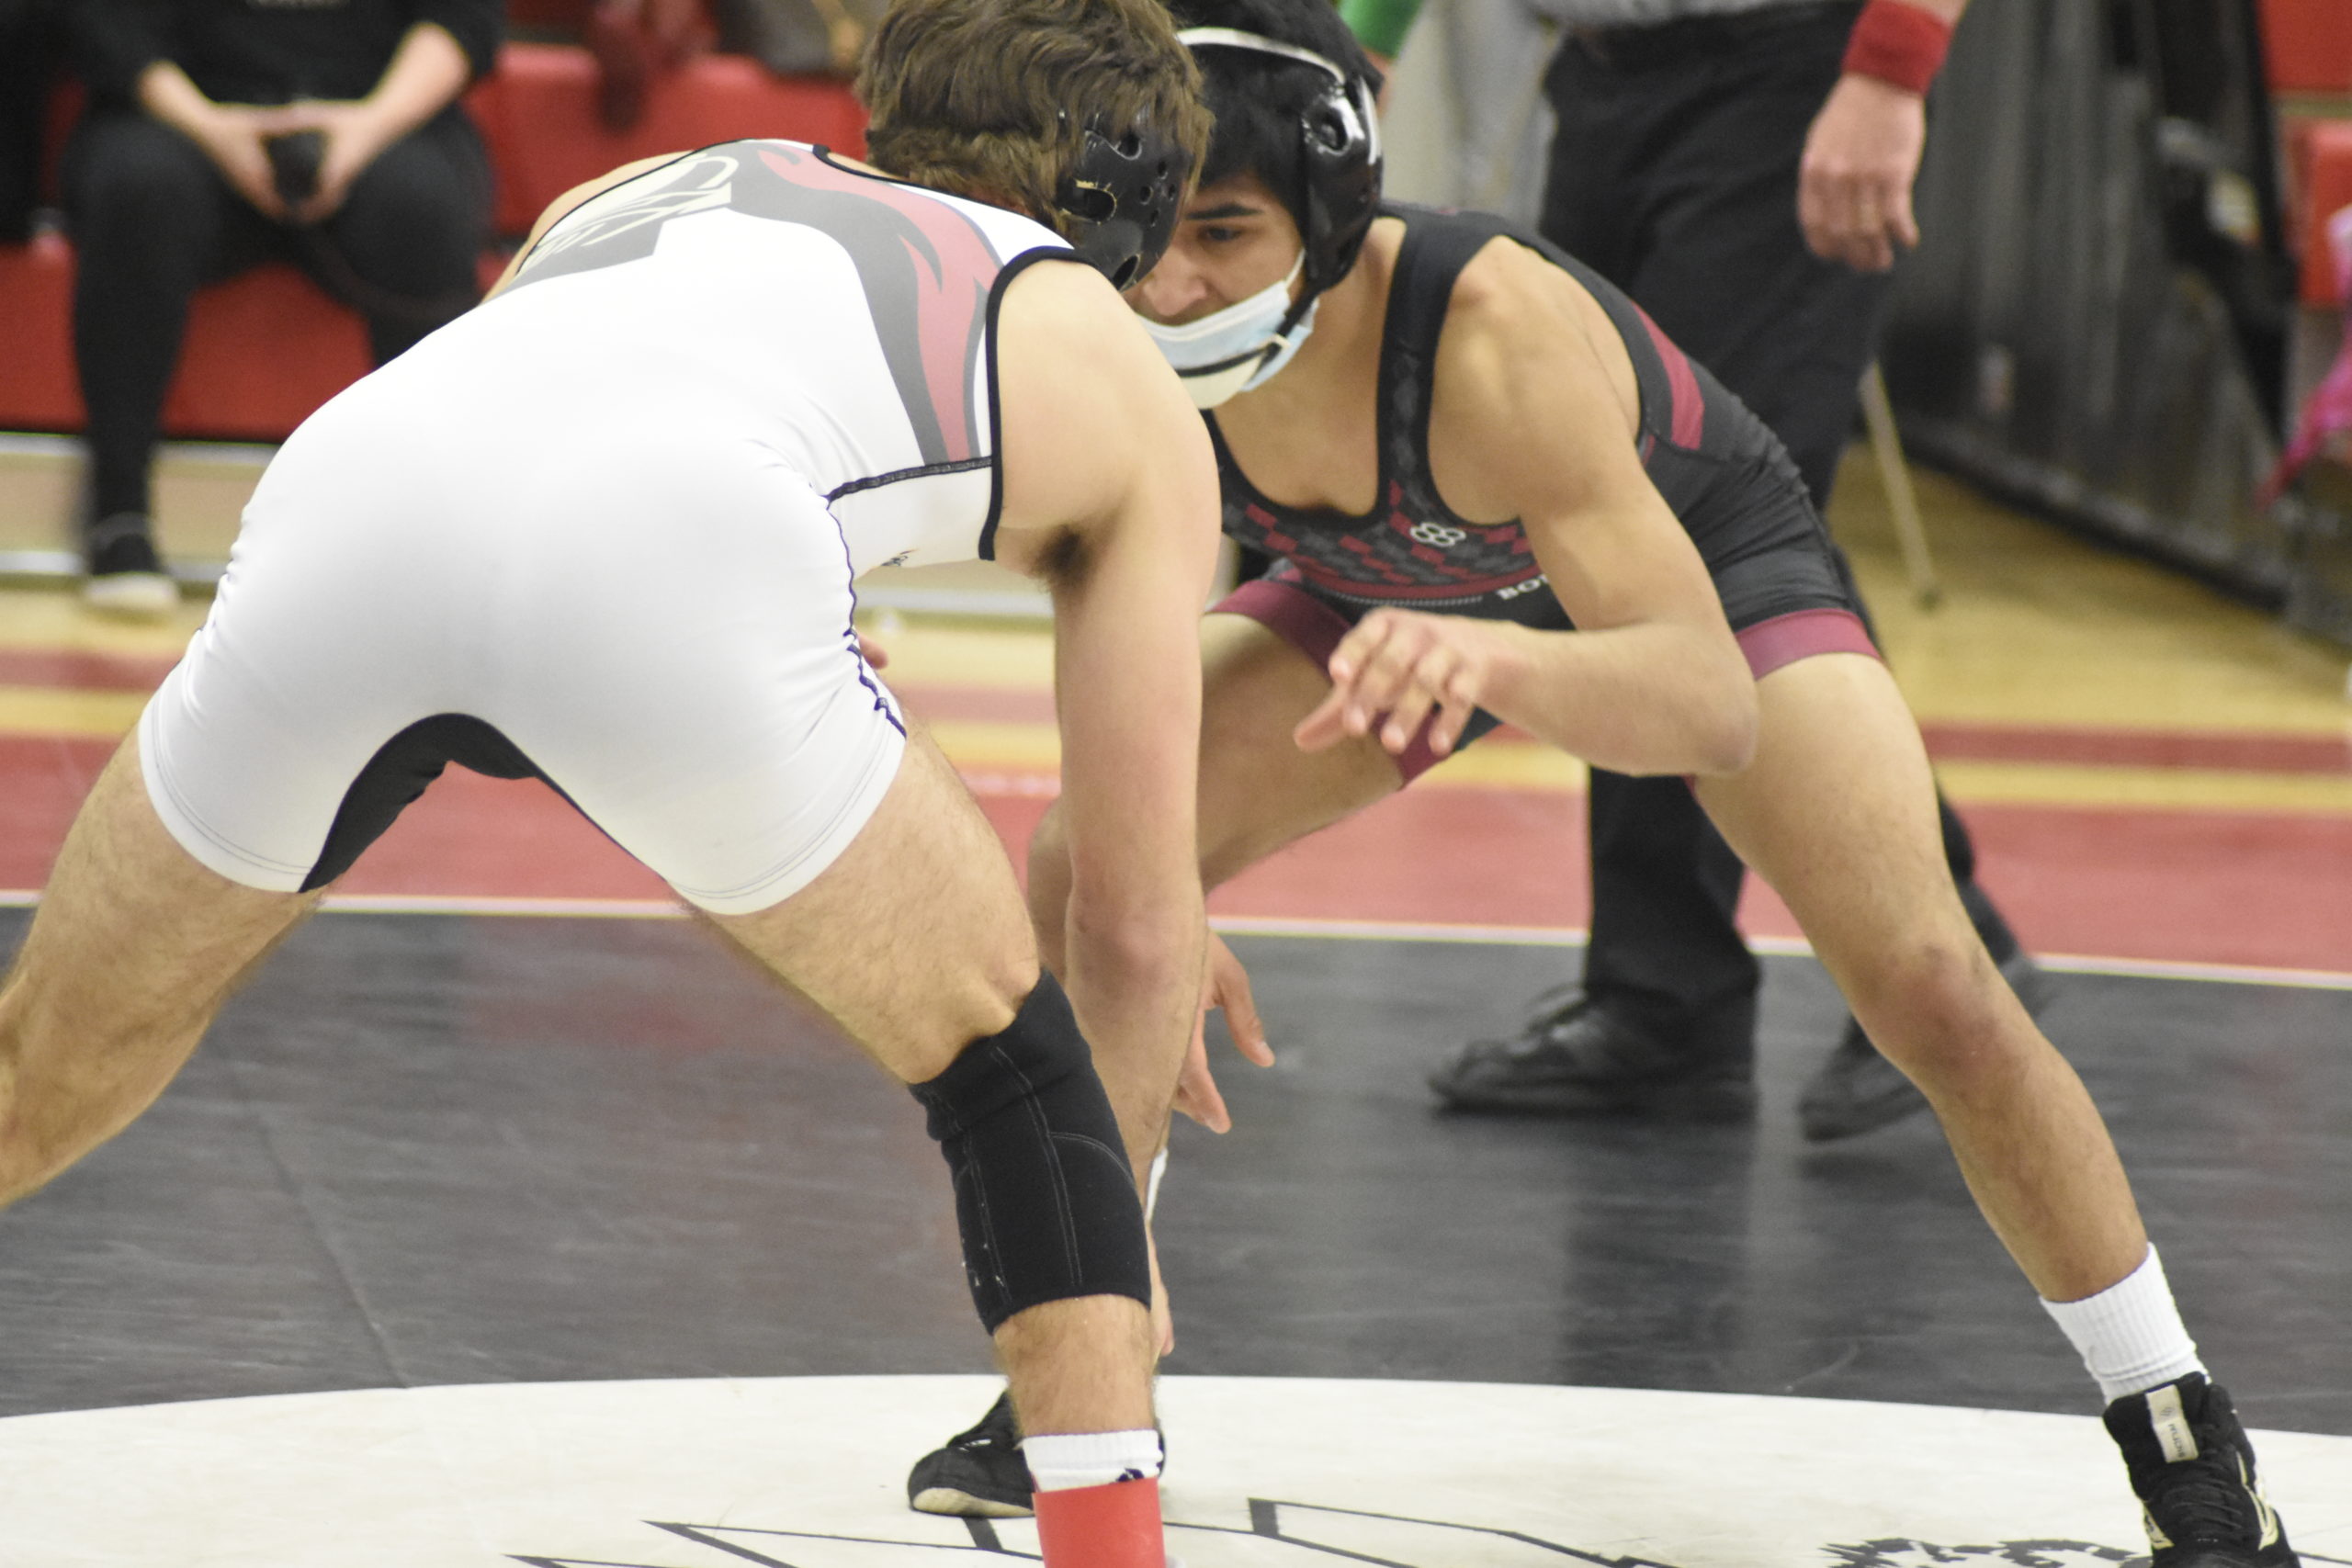 Bonac senior Caleb Peralta faced off against Vin Ziccardi of Kings Park for the 126-pound League V title on Saturday.